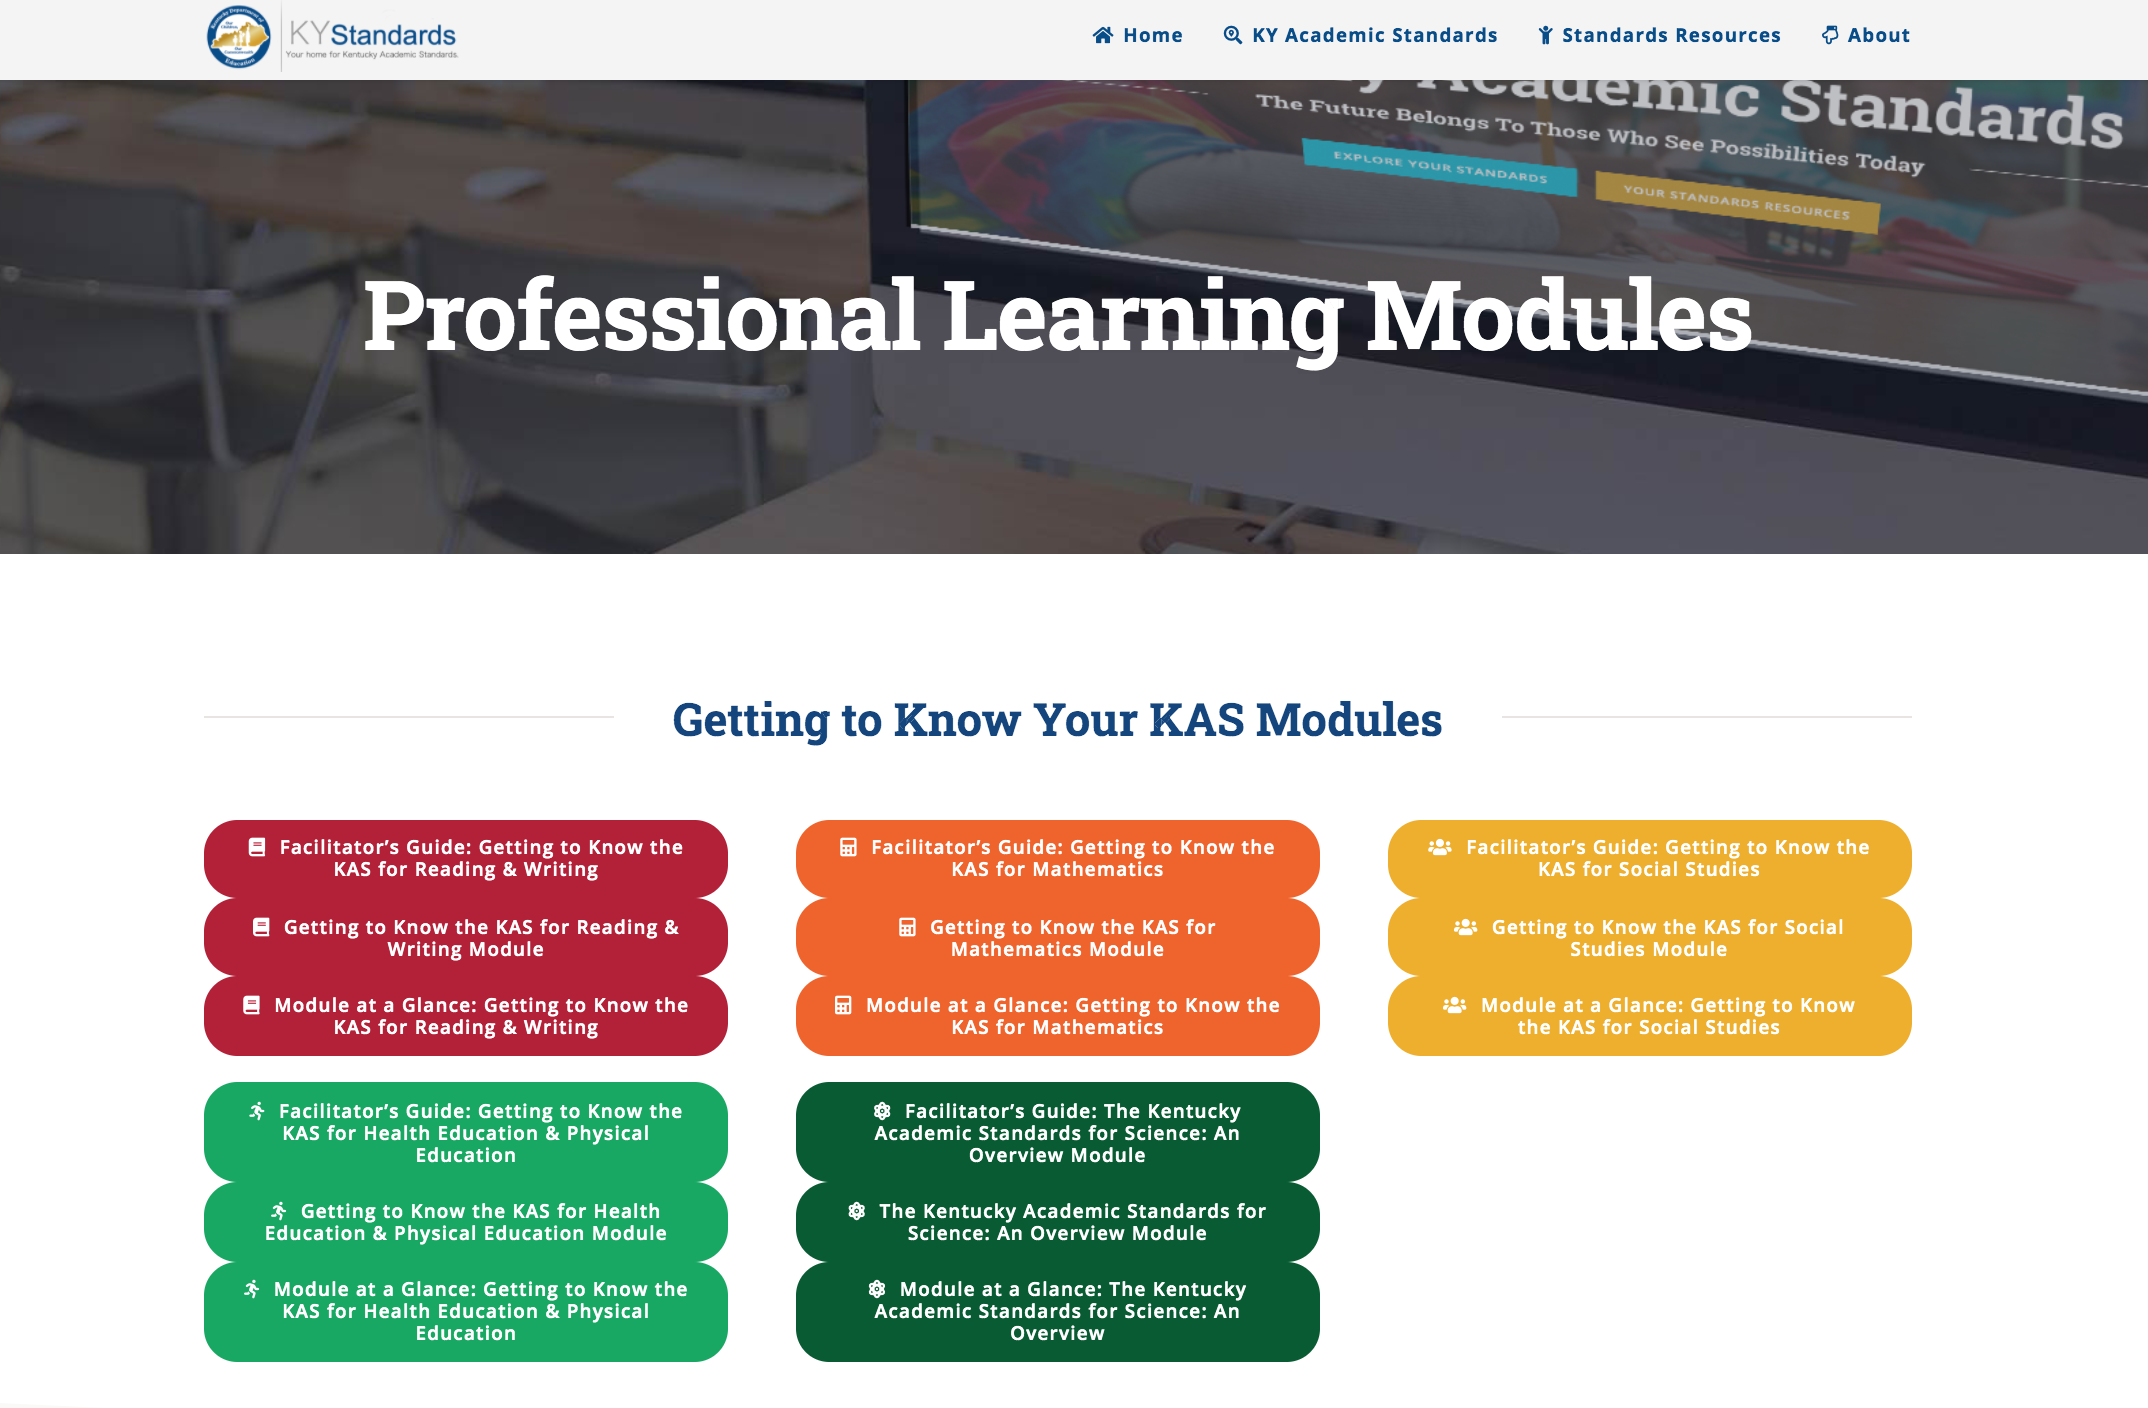 Professional Learning Modules webpage on KYstandards.org